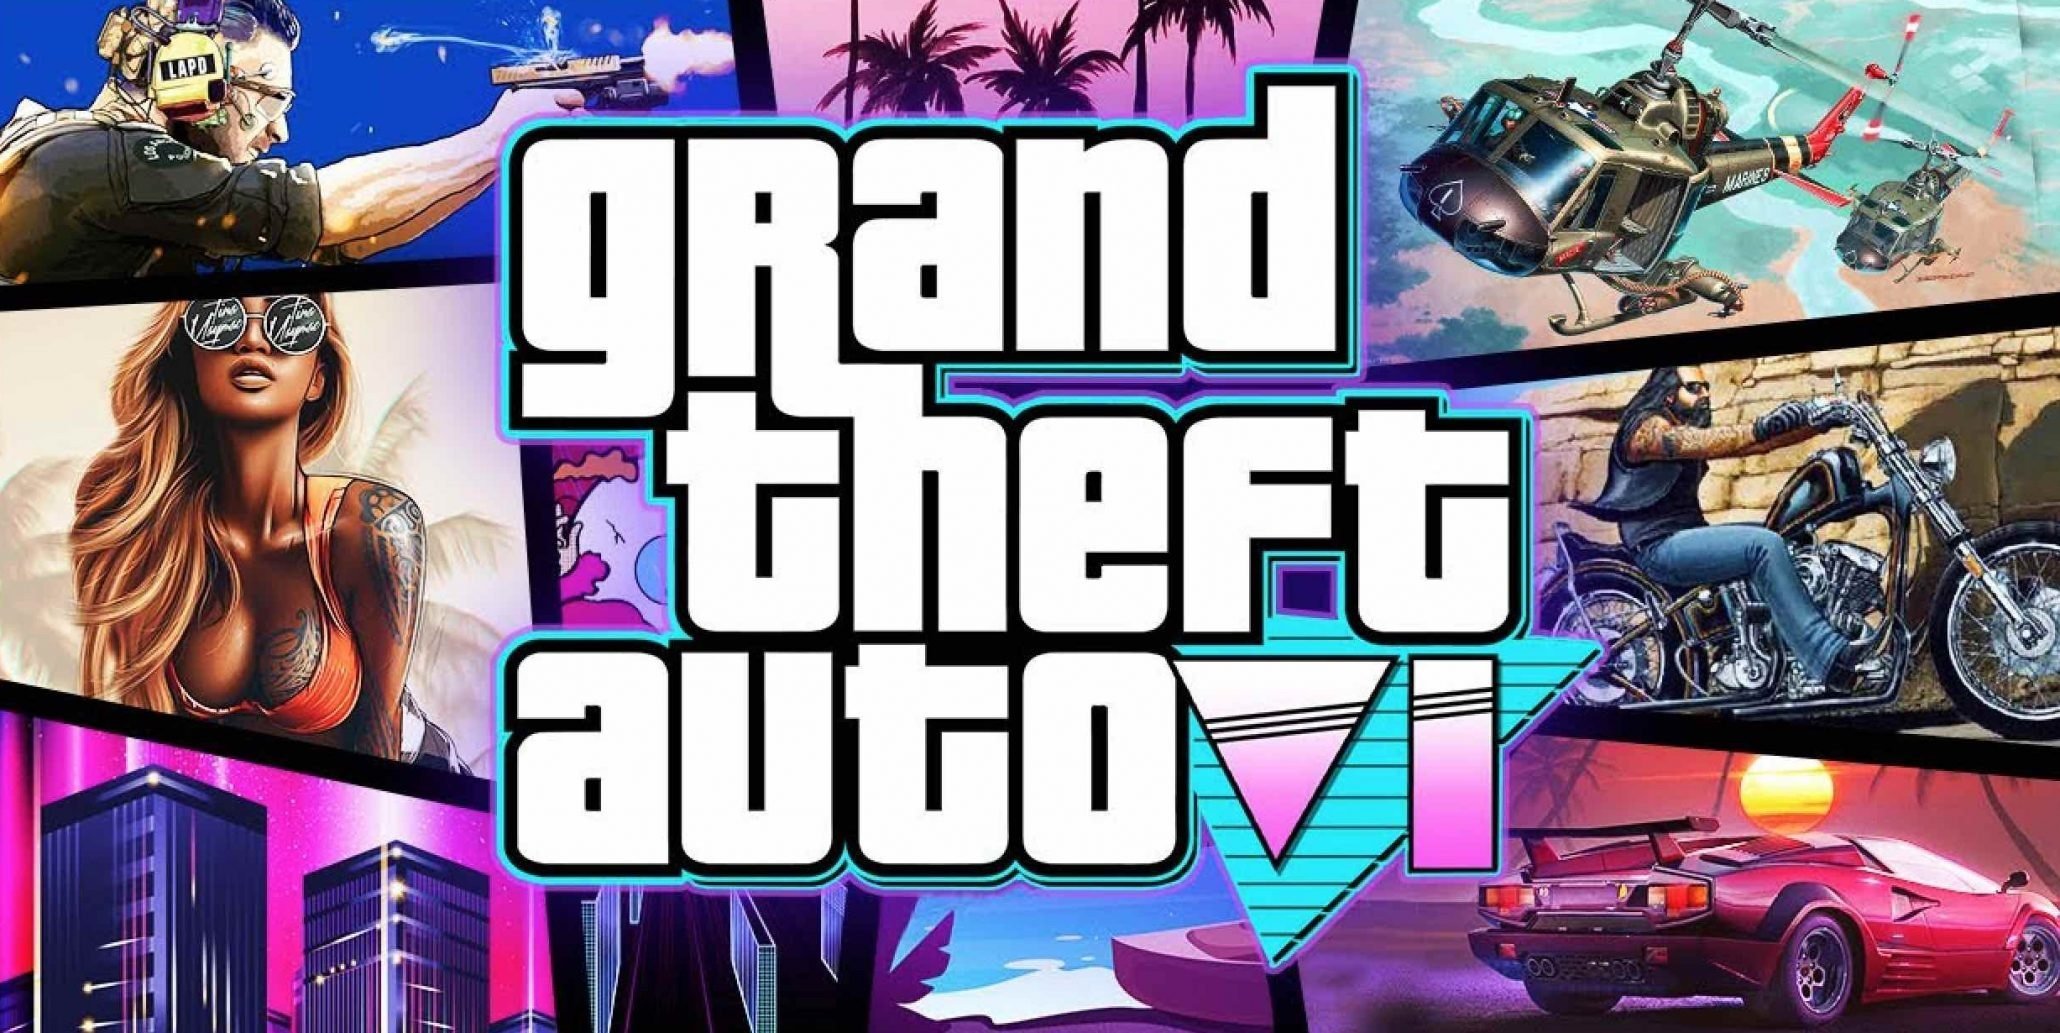 What is the gta 5 theme song фото 12